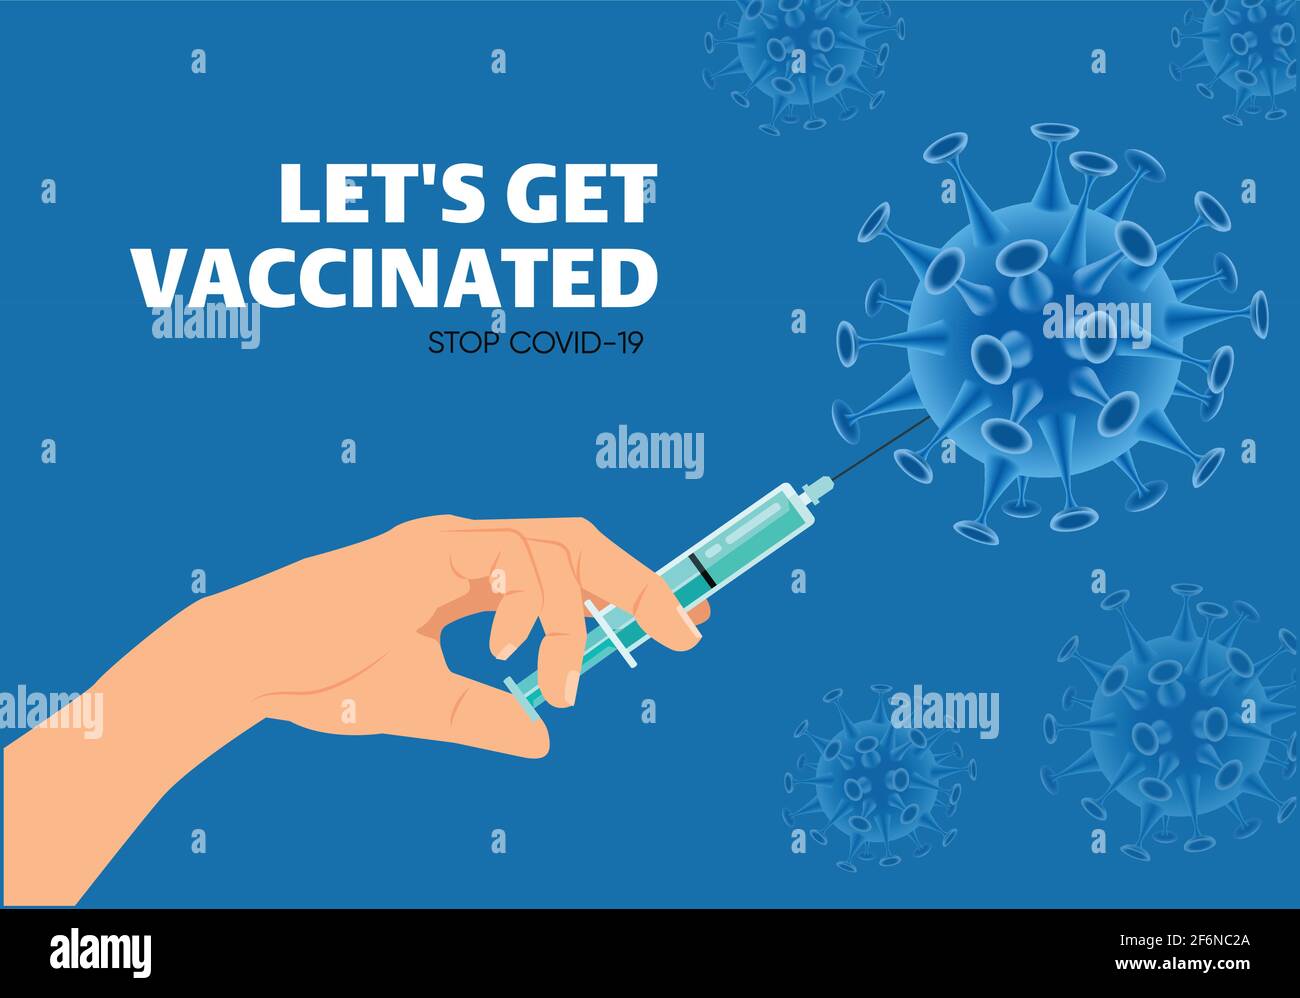 Covid-19 Vacctination Poster. Doctor`s hand holding syringe with vaccine. Vector illustration. Let's get vaccinated. Let's Stop Covid-19. Promotion. Stock Vector